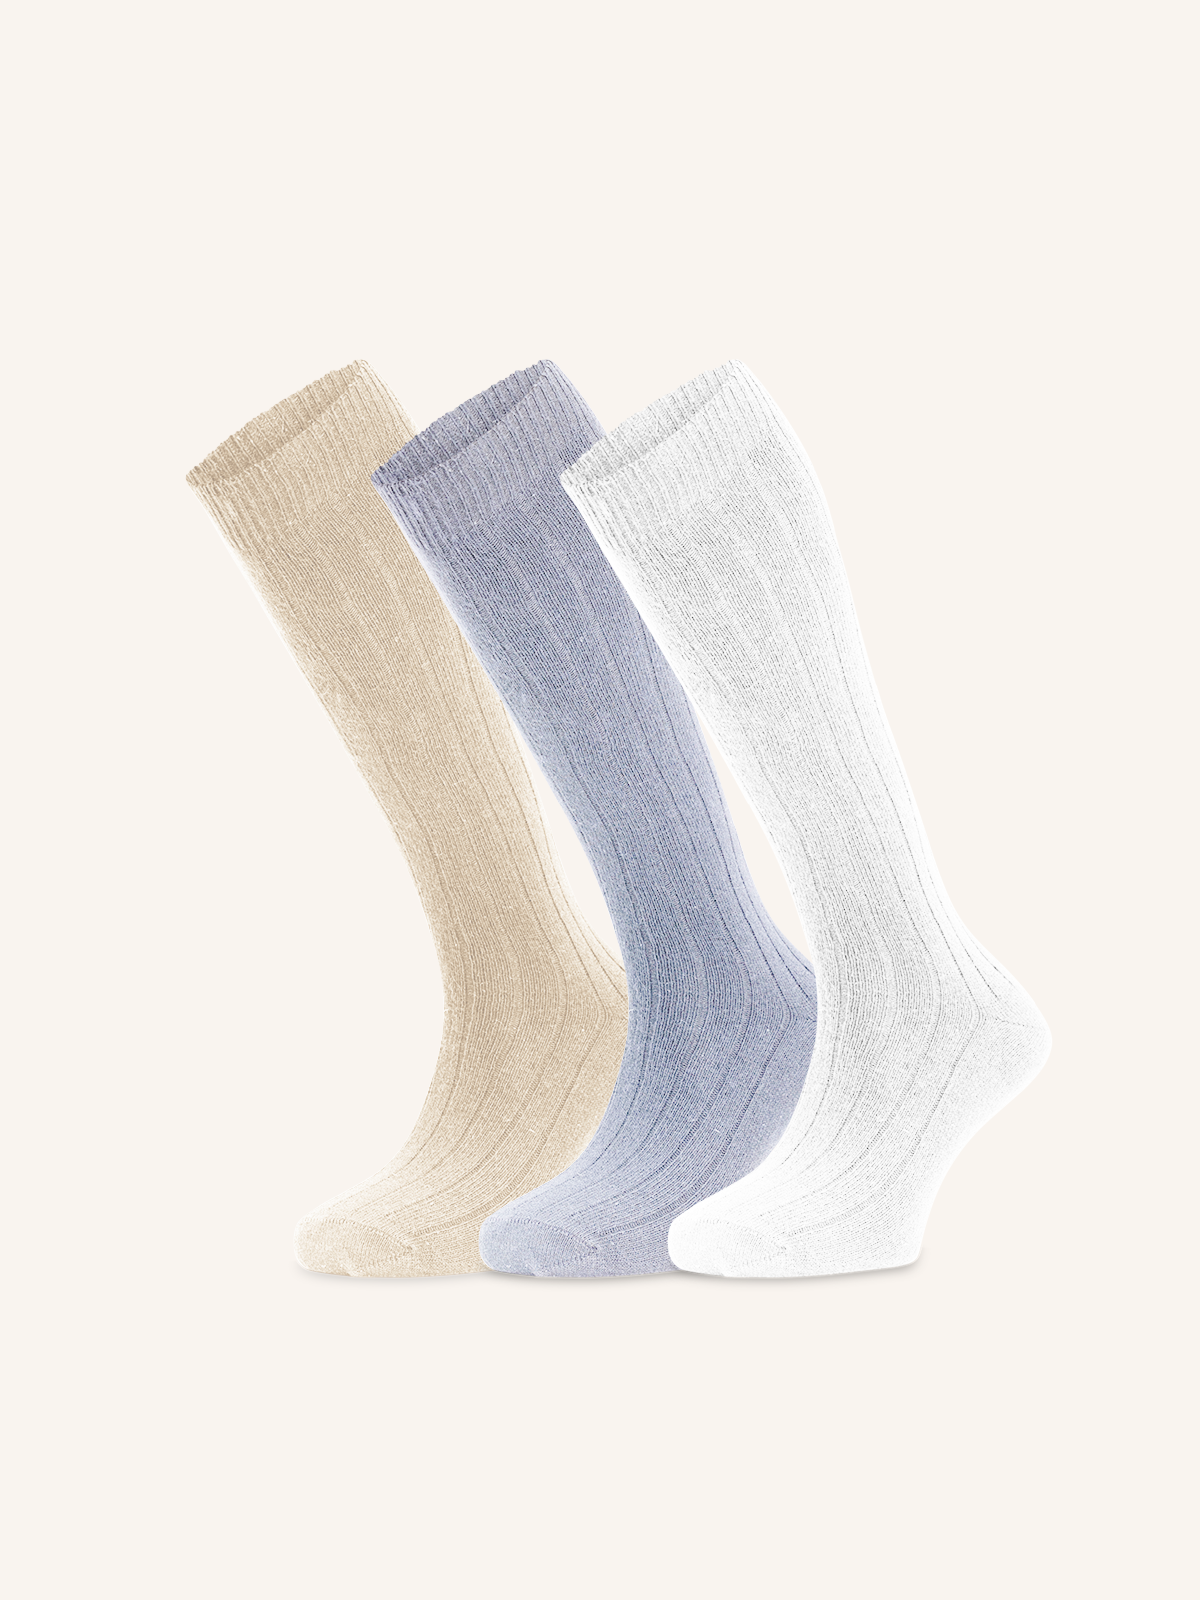 Long Ribbed Sock in Angora, Cotton and Viscose for Men | Plain Color | Pack of 3 Pairs | Blond L